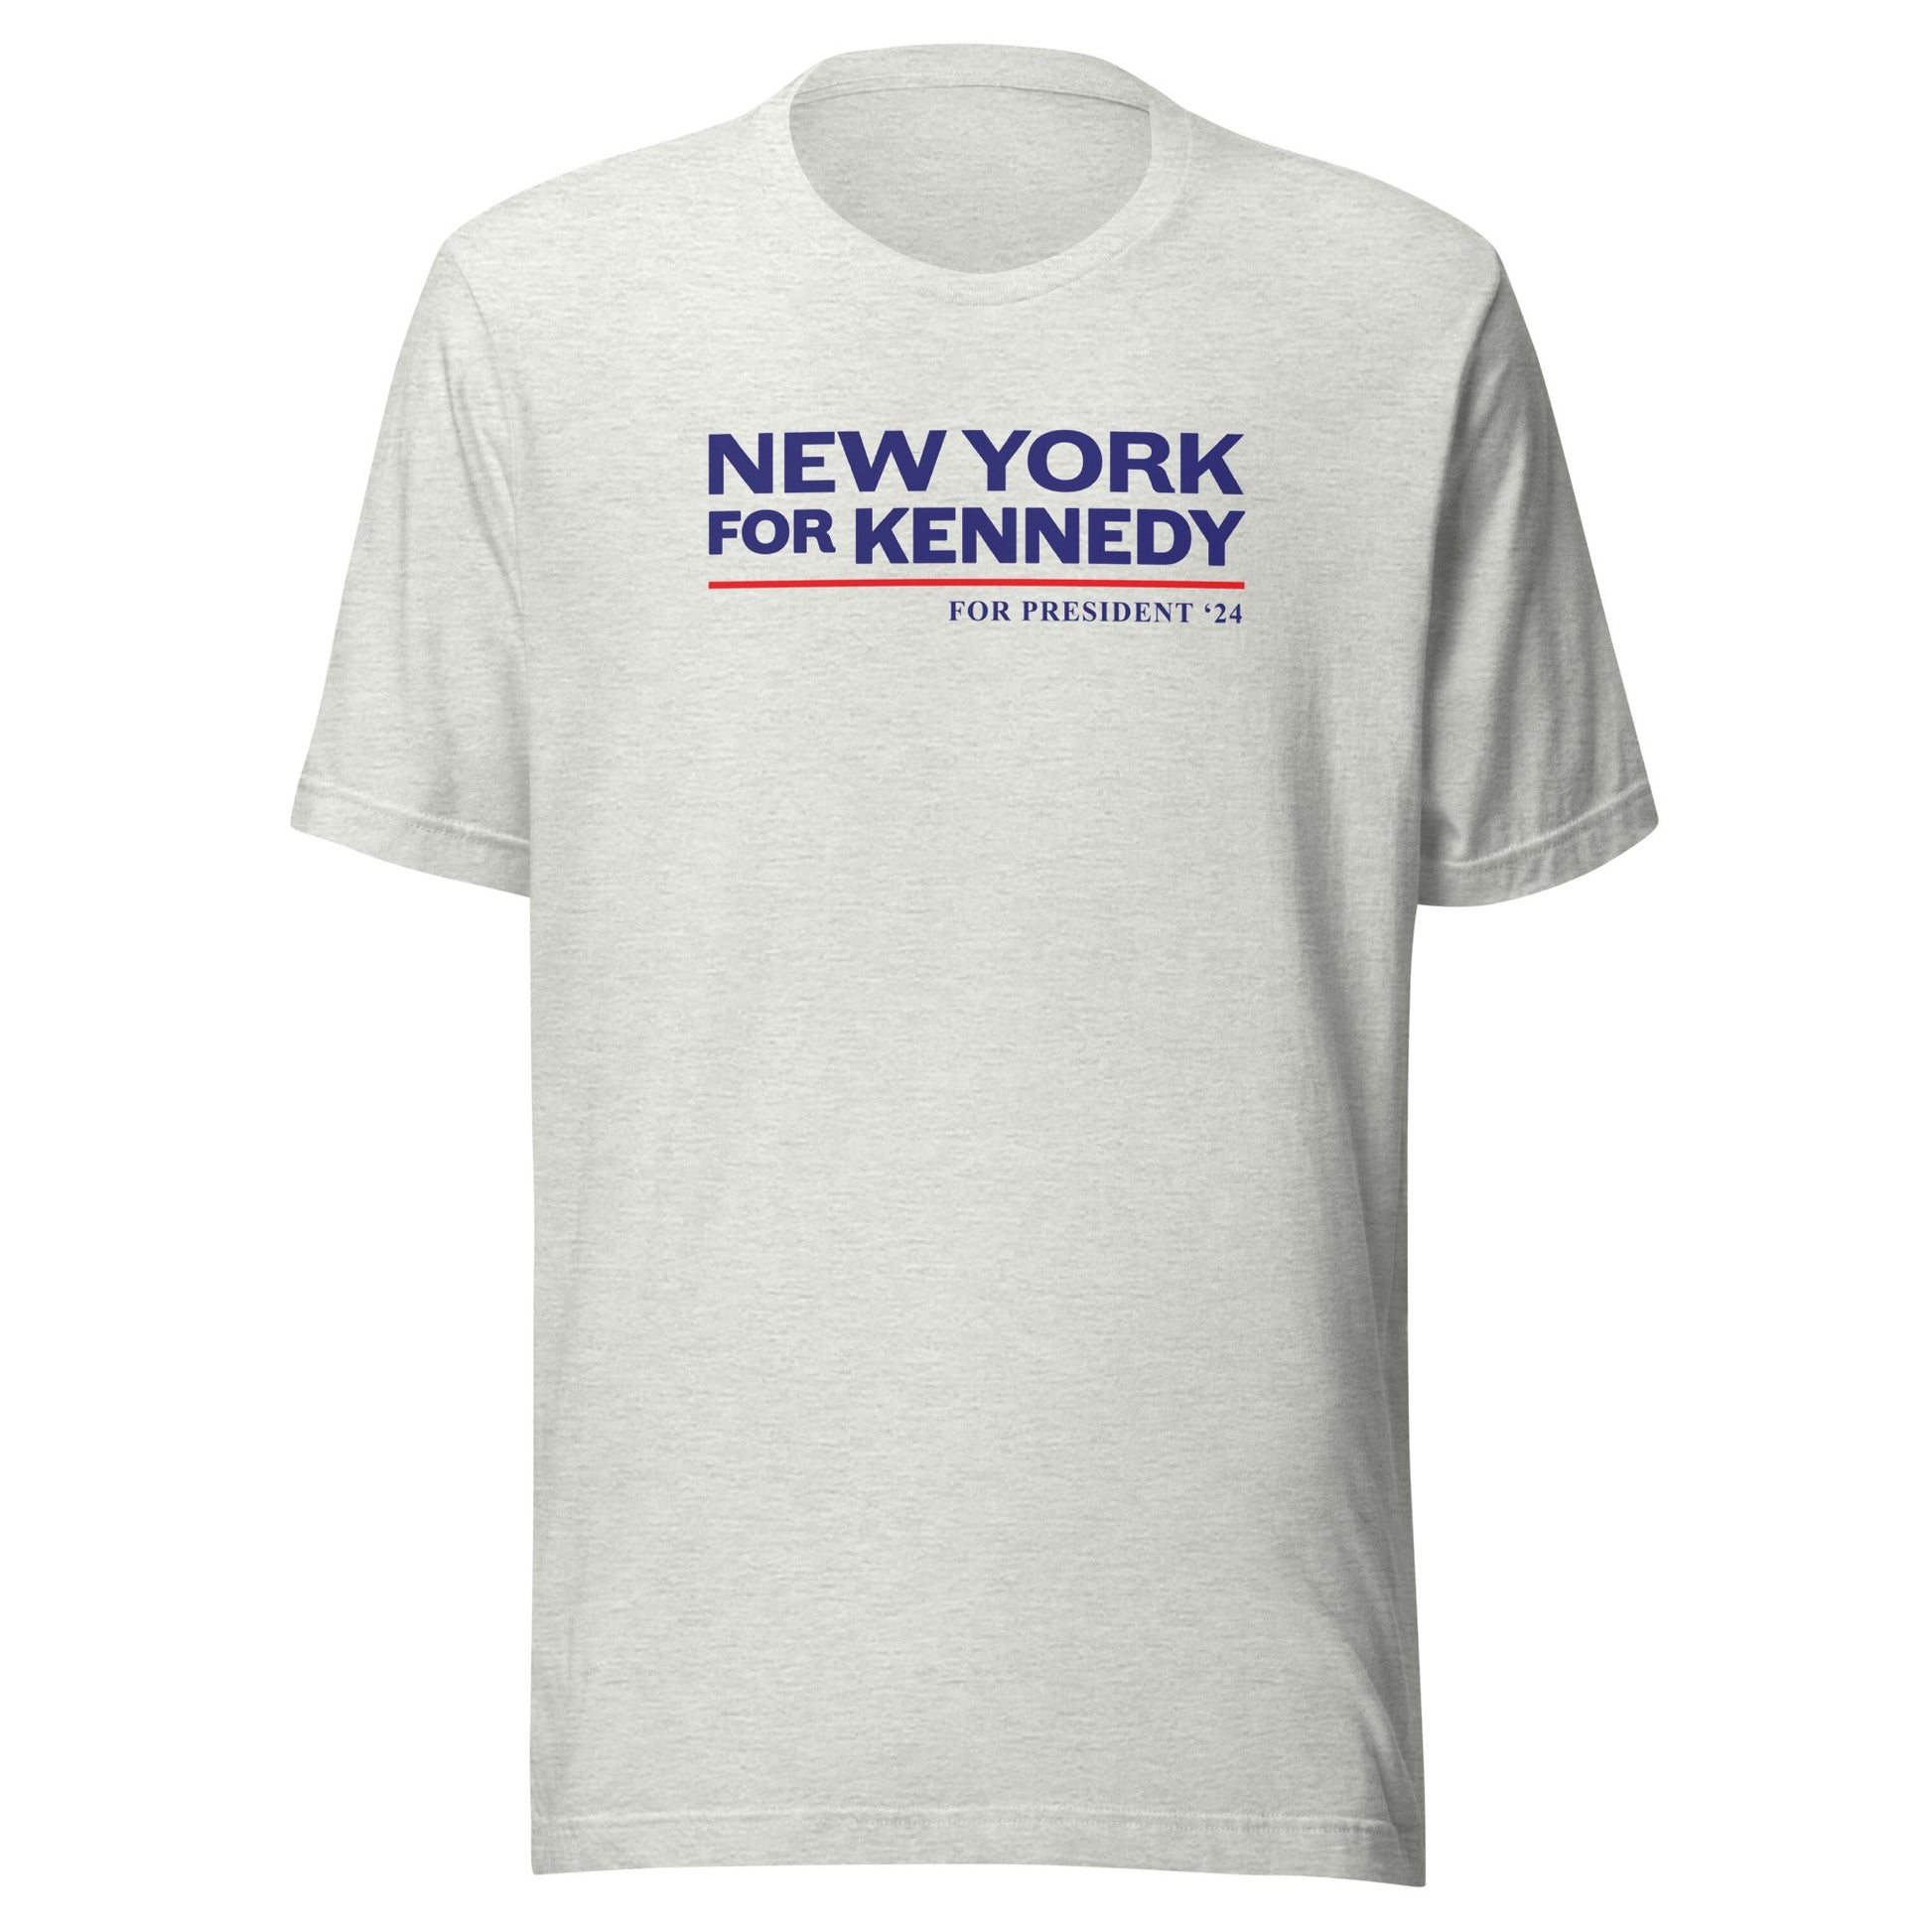 New York for Kennedy Unisex Tee - TEAM KENNEDY. All rights reserved